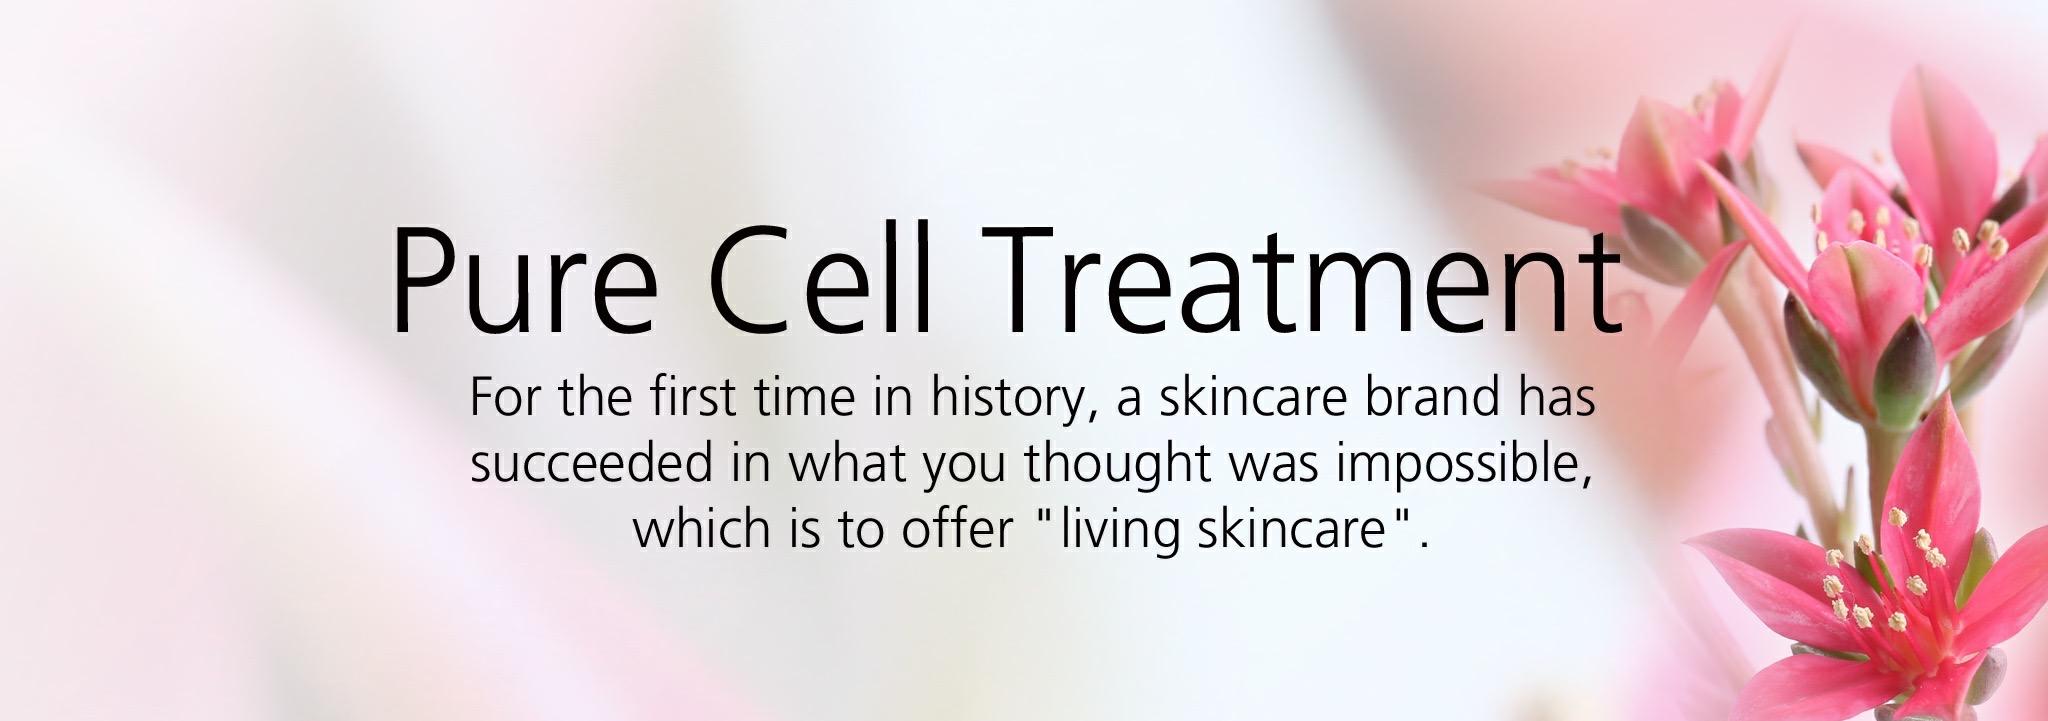 Pure cell treatment